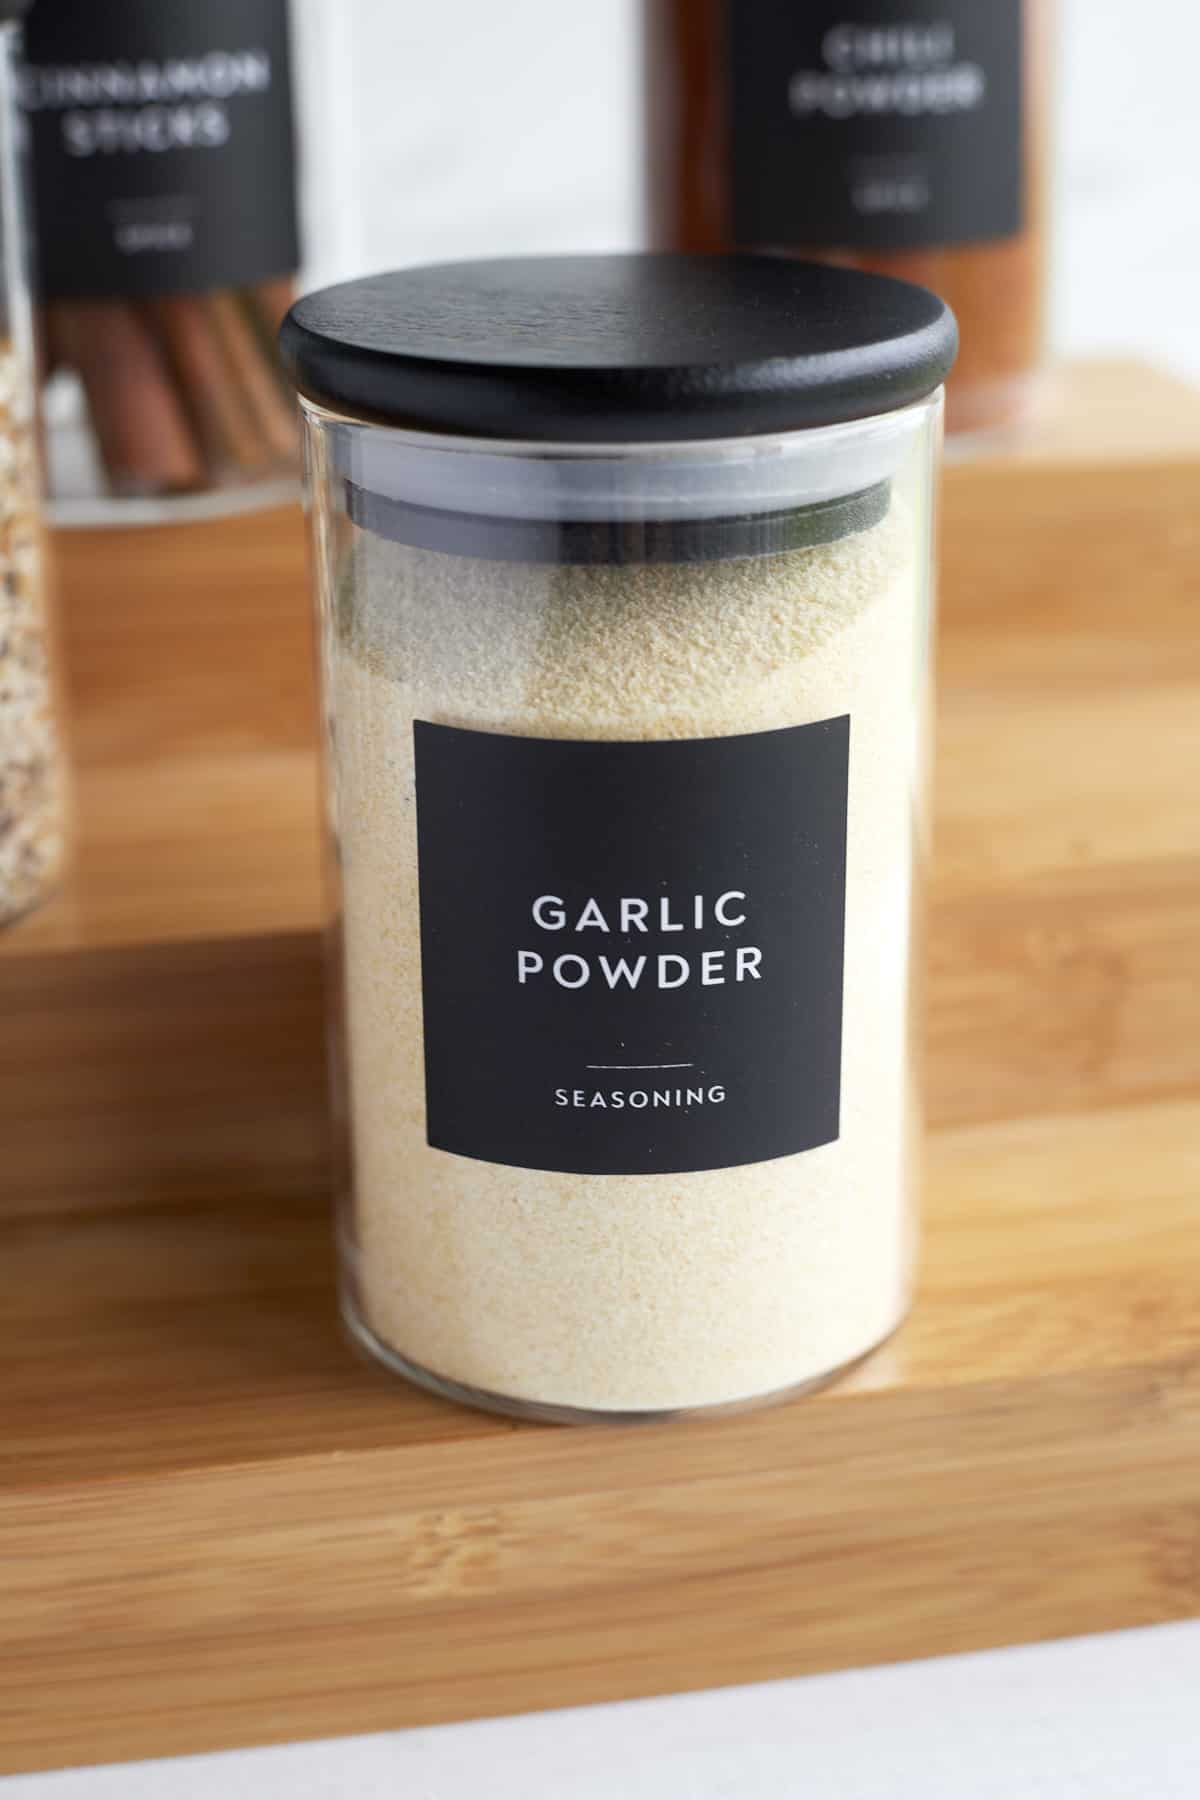 a clear bottle full of garlic powder with a black label on the front